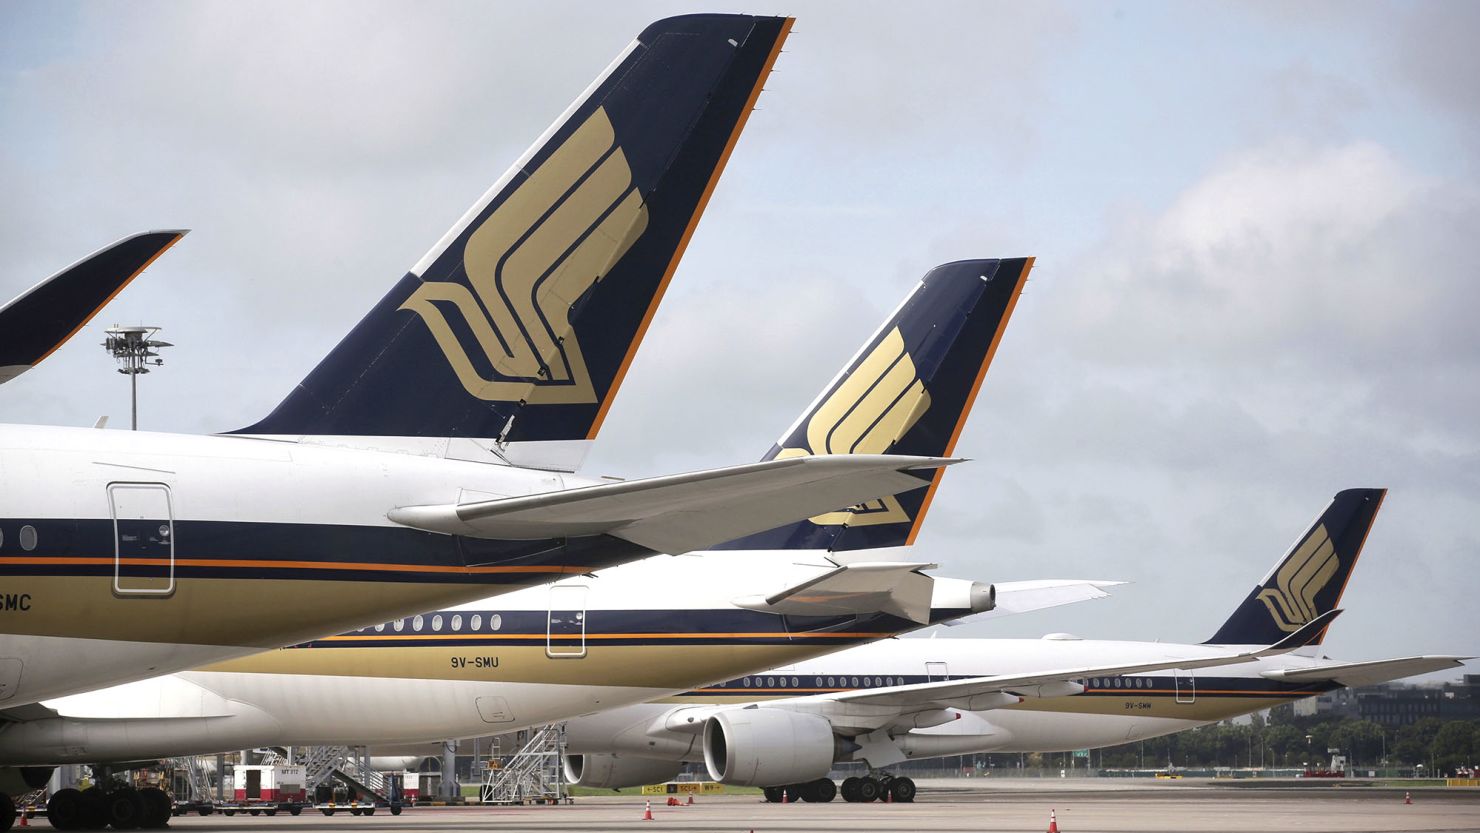 Singapore Airlines planes on the tarmac on 5 December 2020.